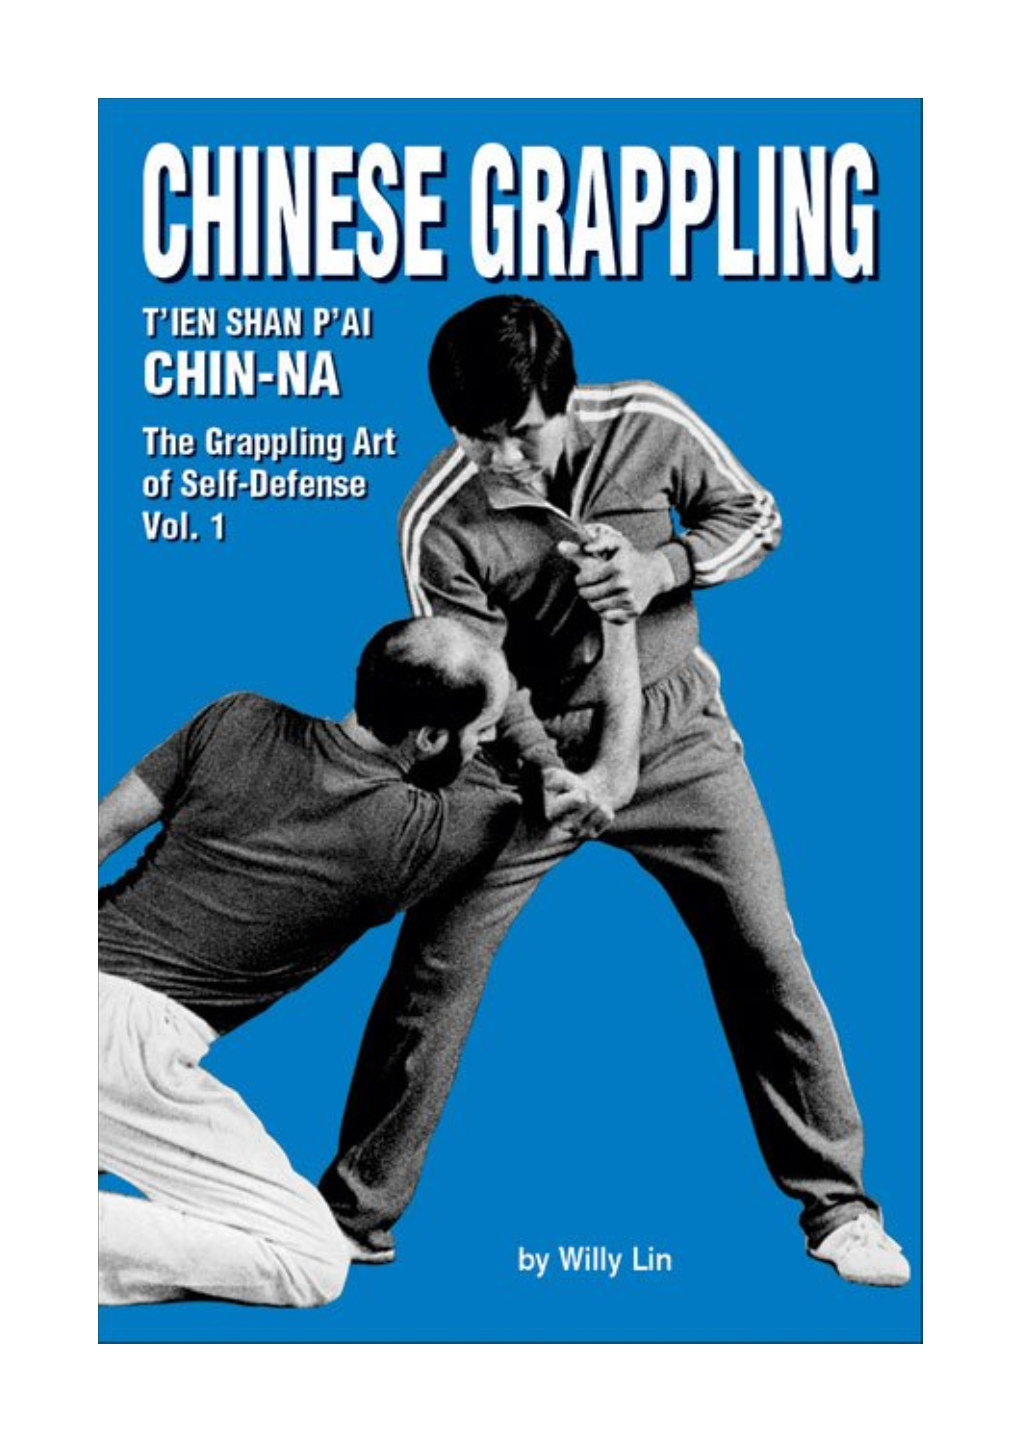 160 Pages / Willy Lin / 0897500768, 9780897500760 / Black Belt